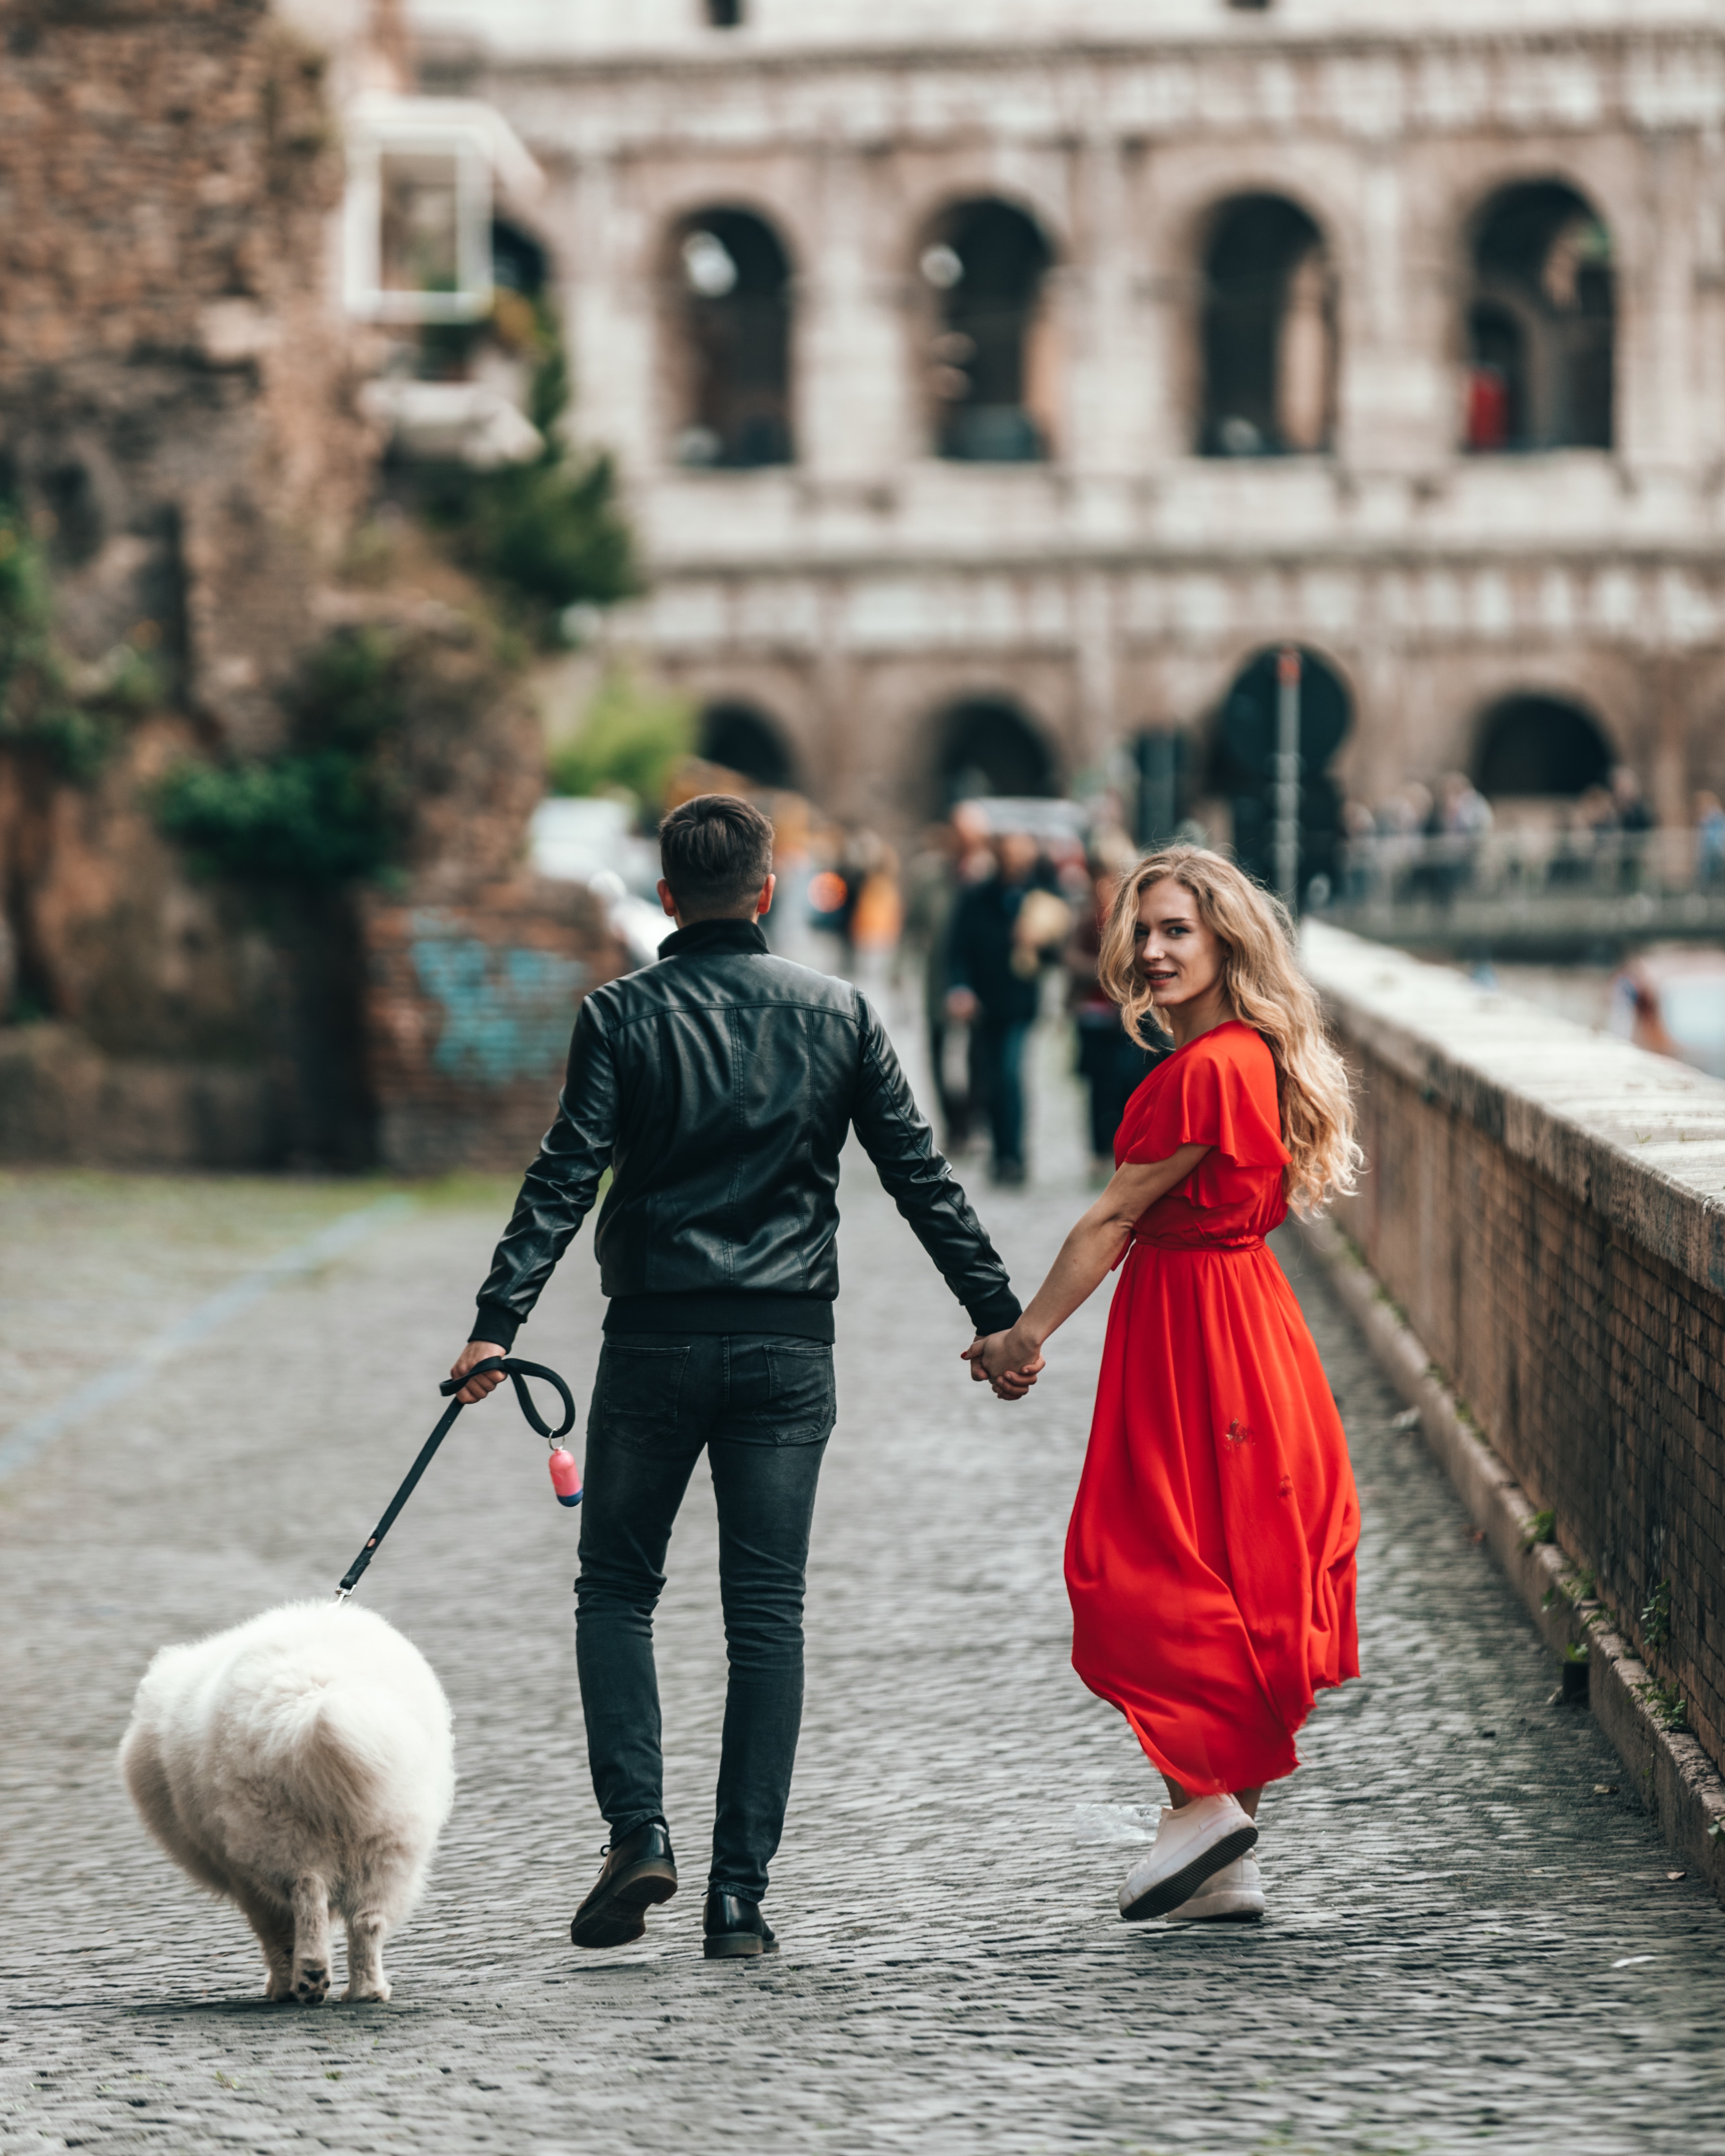 Romantic couple with their dog in Rome | Source: Unsplash